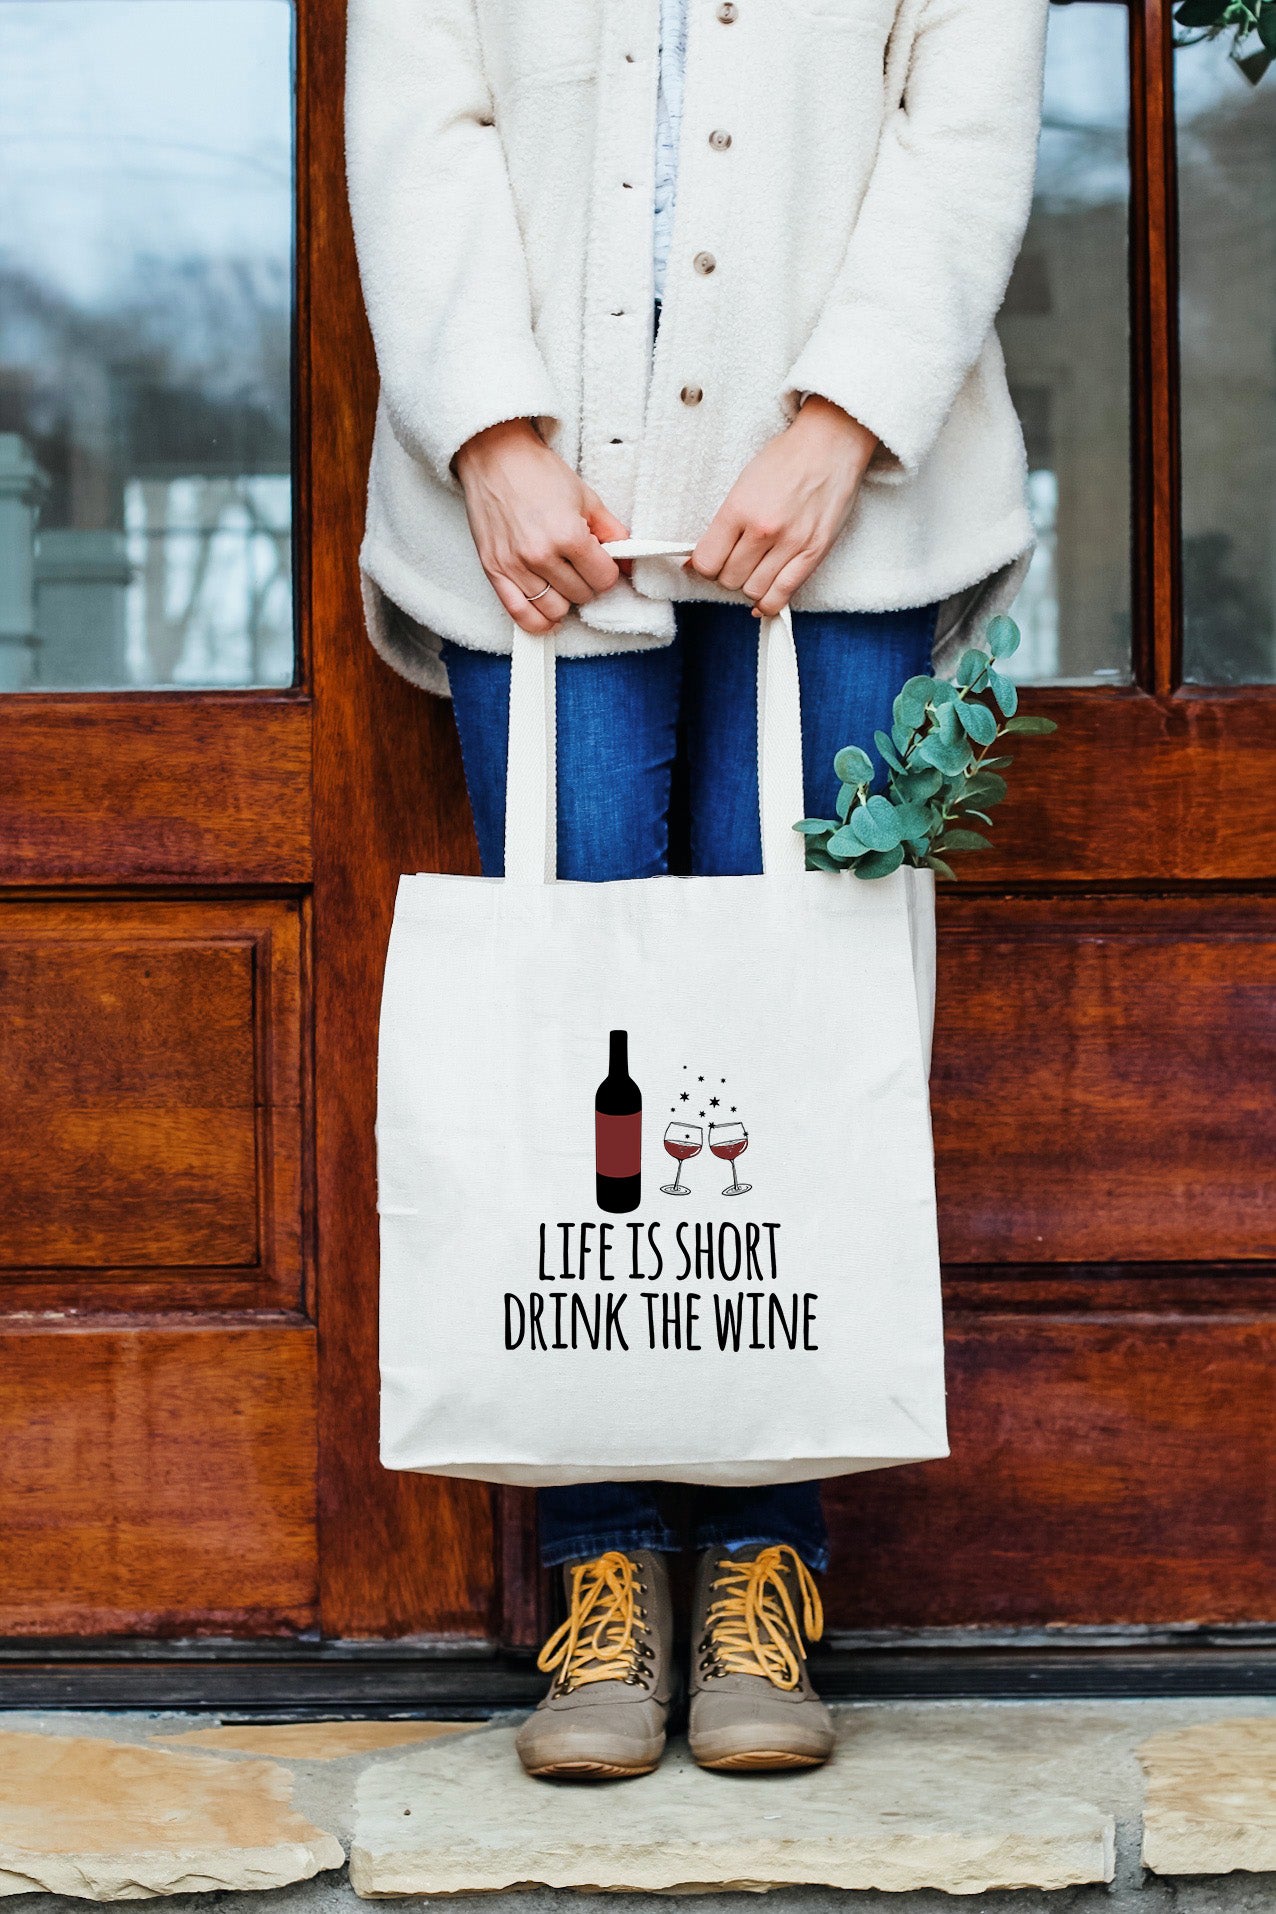 a woman holding a wine bottle and a tote bag